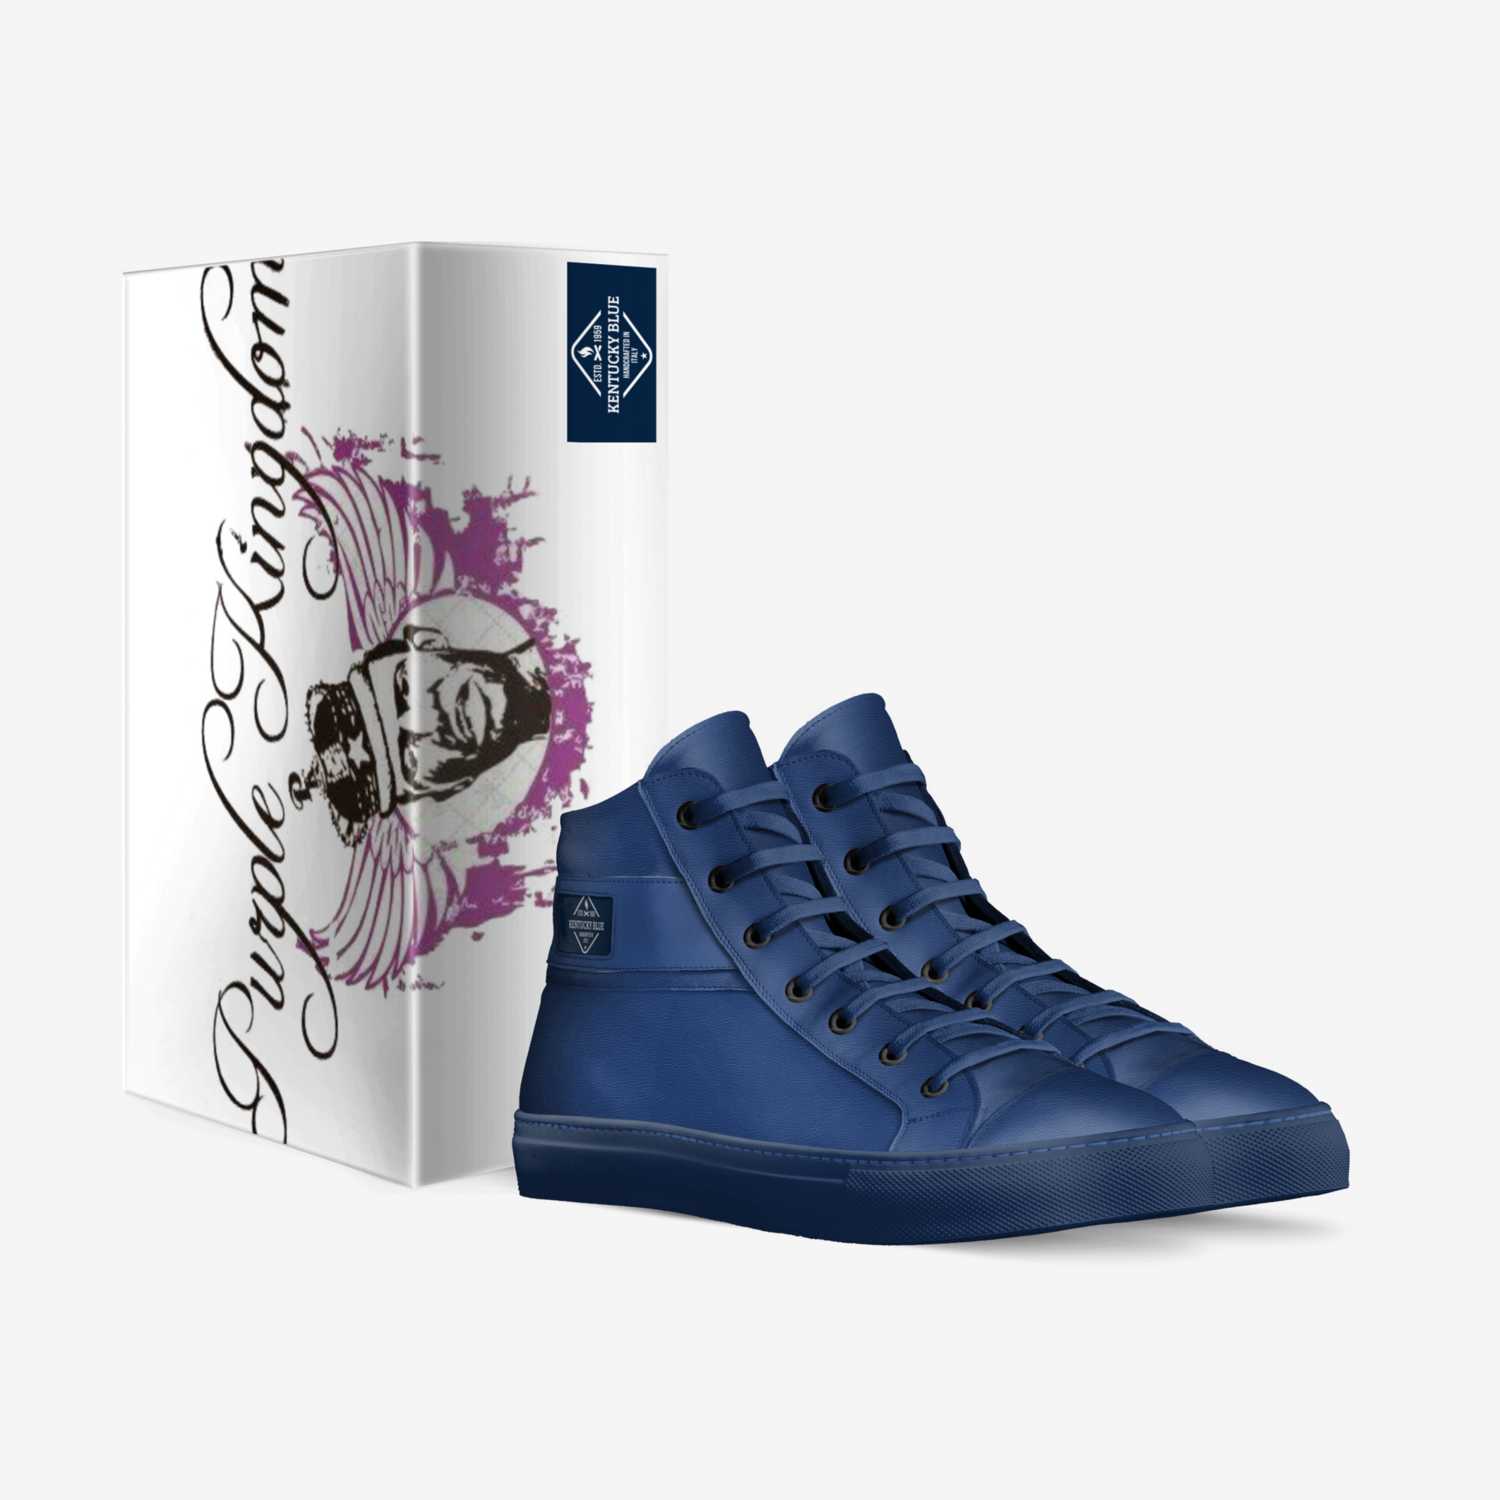 Kentucky blue custom made in Italy shoes by Voofisher Voo | Box view